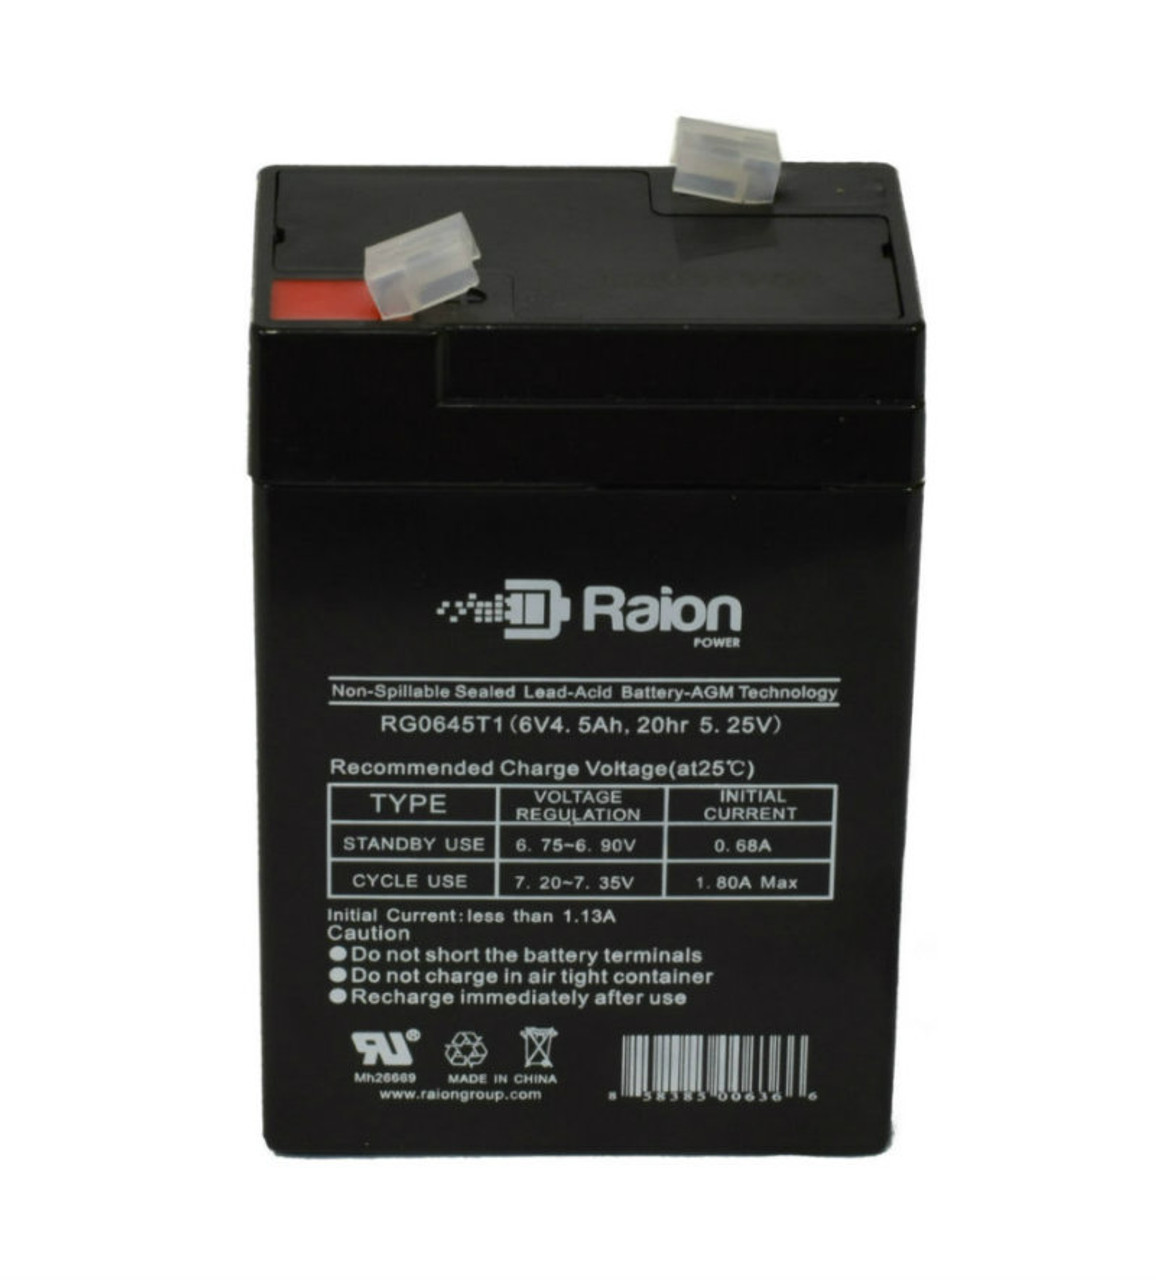 Raion Power RG0645T1 Replacement Battery Cartridge for Fuli FL620